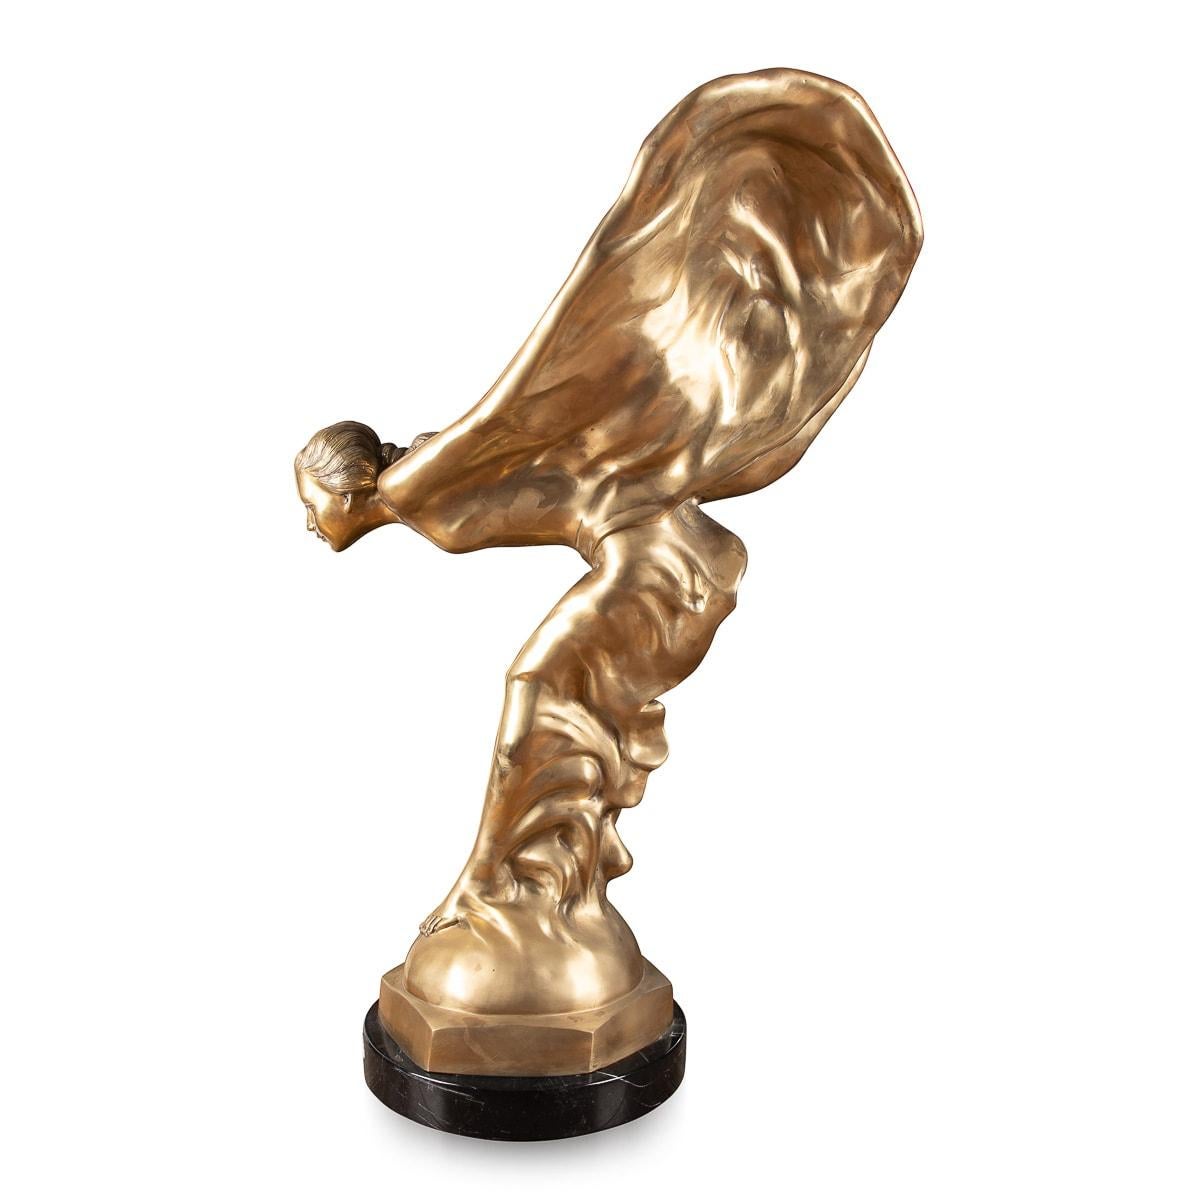 Mid-20th century monumental showroom display bronze of the legendary Rolls-Royce mascot which was designed by Charles Sykes R.A, the bronze sculpture set on a massive rurned marble plinth.

The Spirit of Ecstasy, also called Eleanor, Silver Lady,